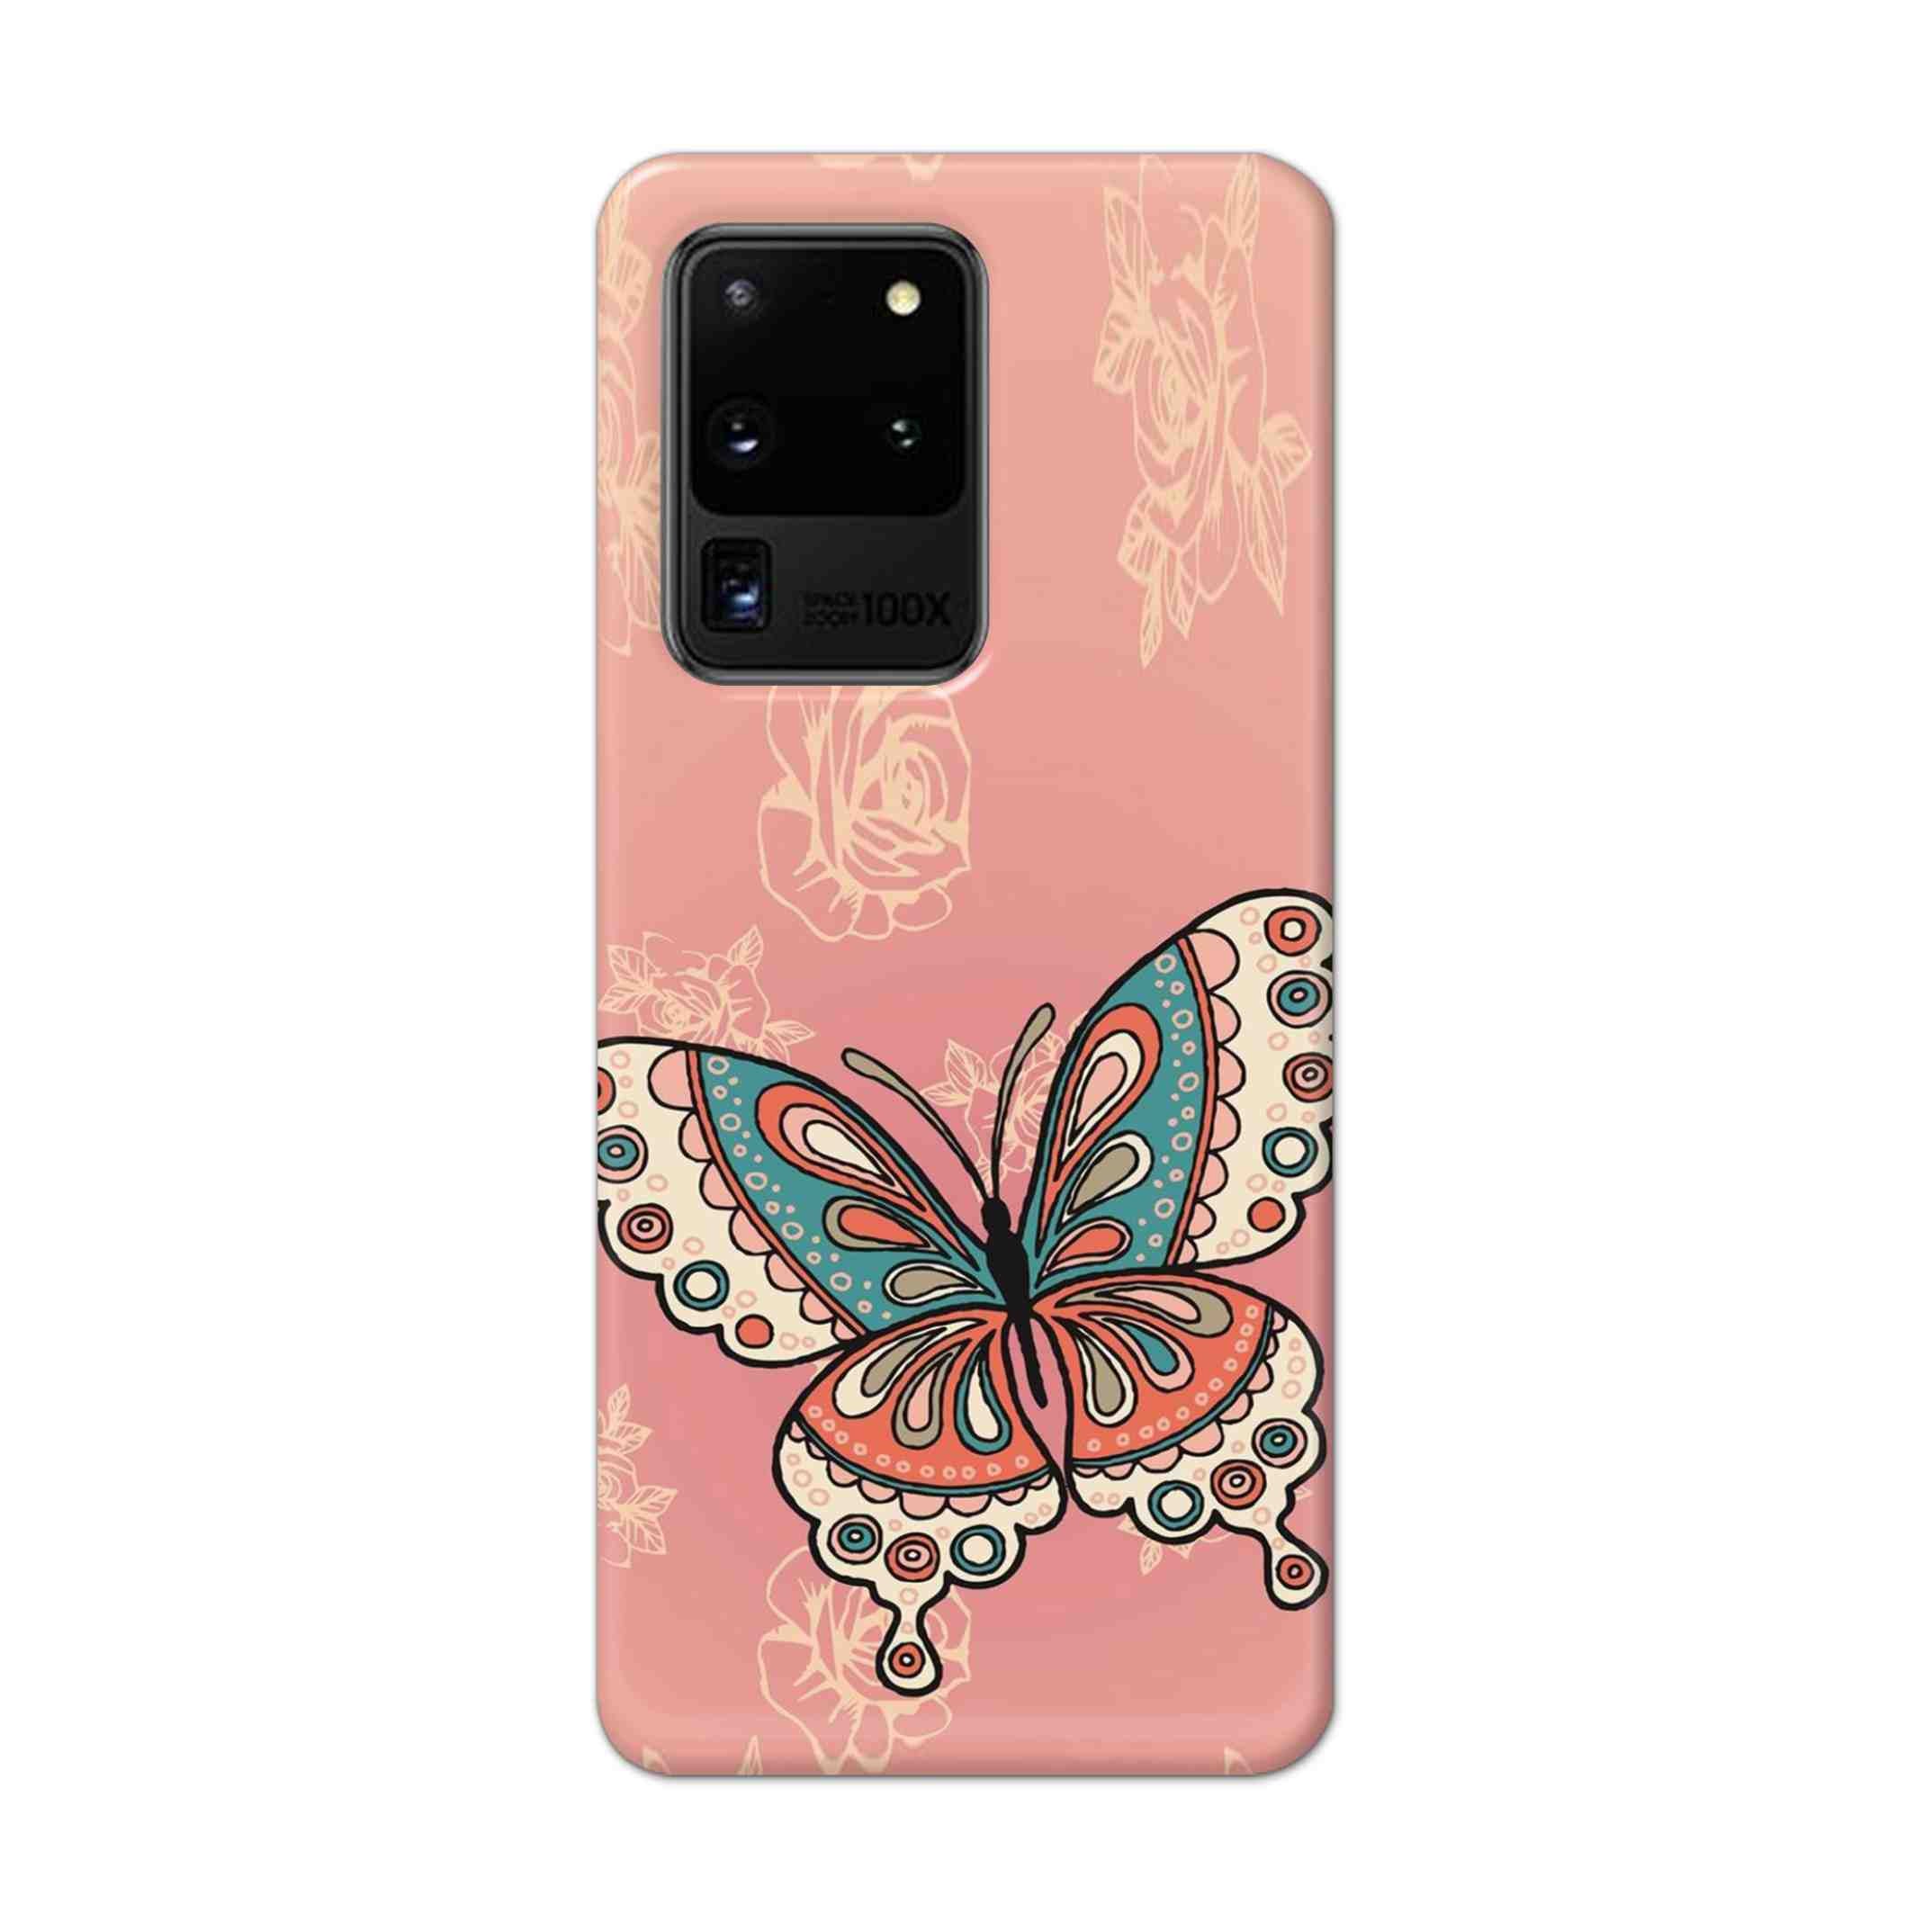 Buy Butterfly Hard Back Mobile Phone Case Cover For Samsung Galaxy S20 Ultra Online